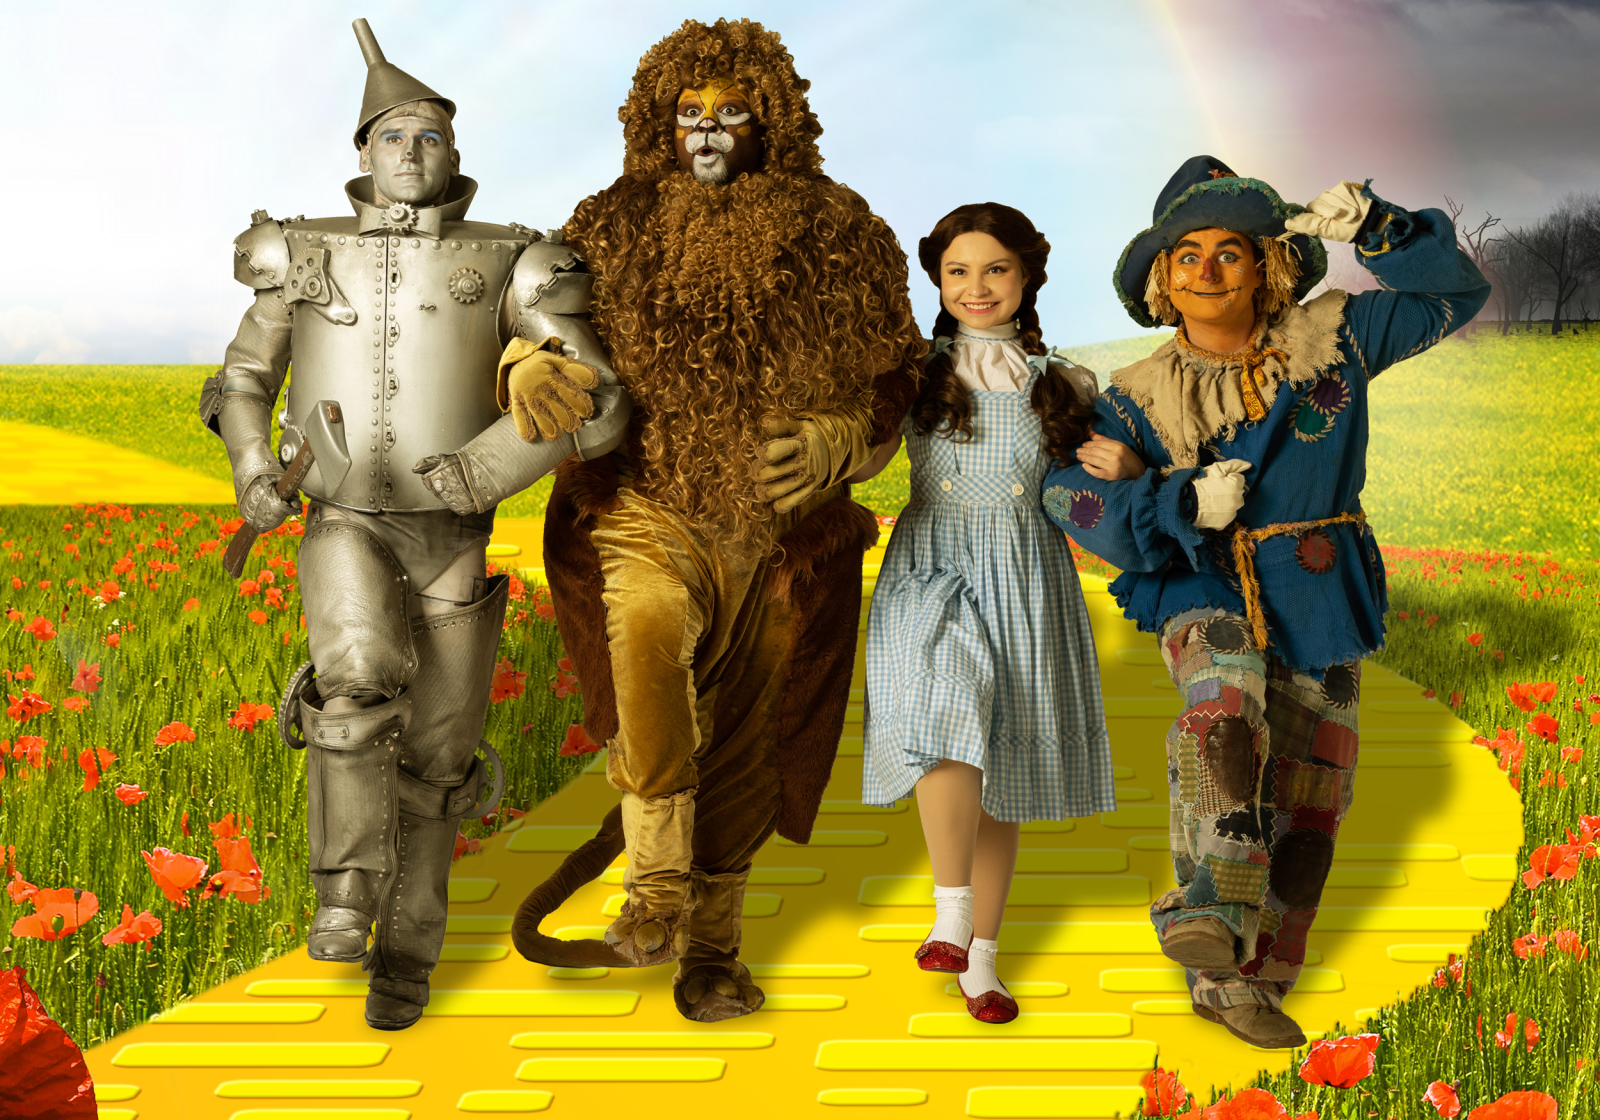 The cast of "The Wizard of Oz"